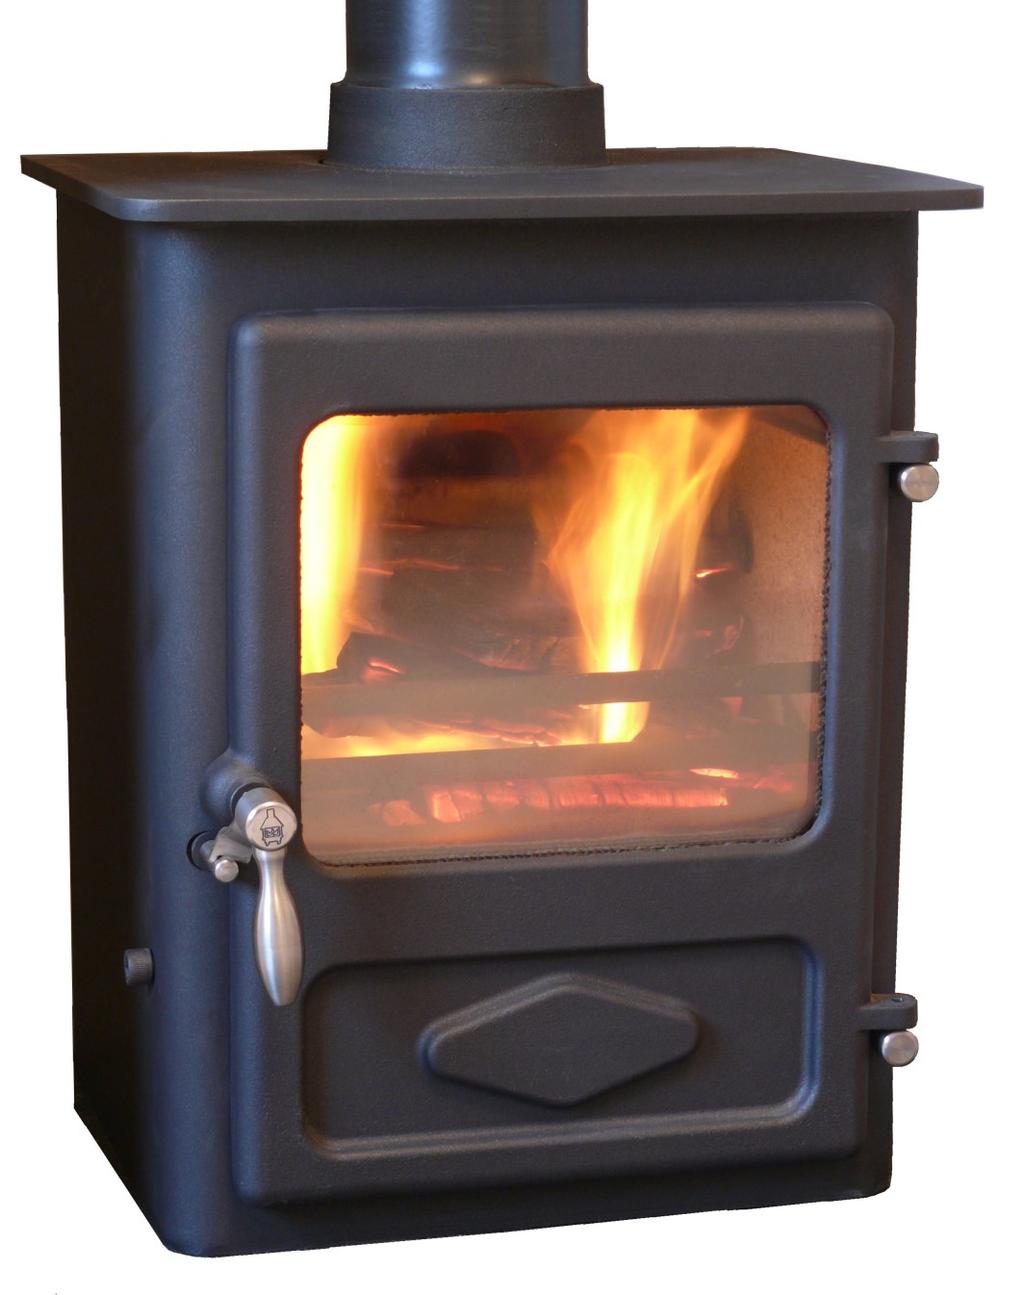 Installation and Operating Instructions for The Fox Fire Free Standing Multi Fuel Stove. Please read this booklet thoroughly before attempting to install or use this appliance.